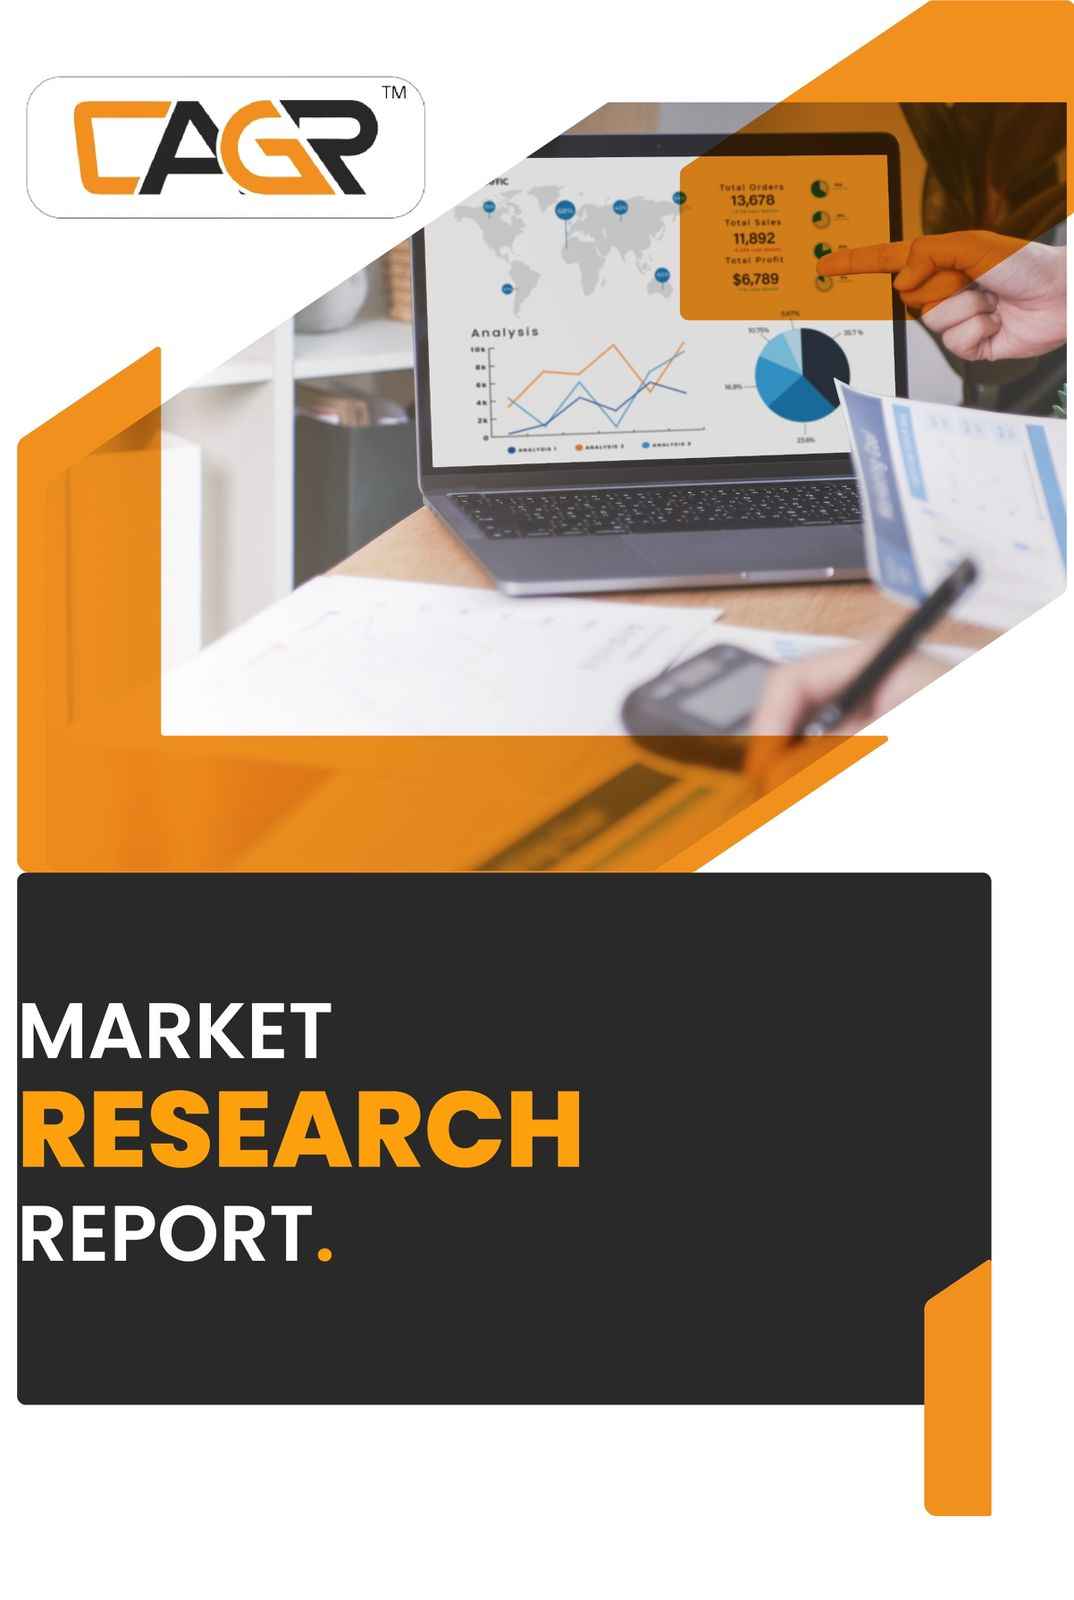 Global Advanced Harmonic Filters Market Status, Trends and COVID-19 Impact Report 2022